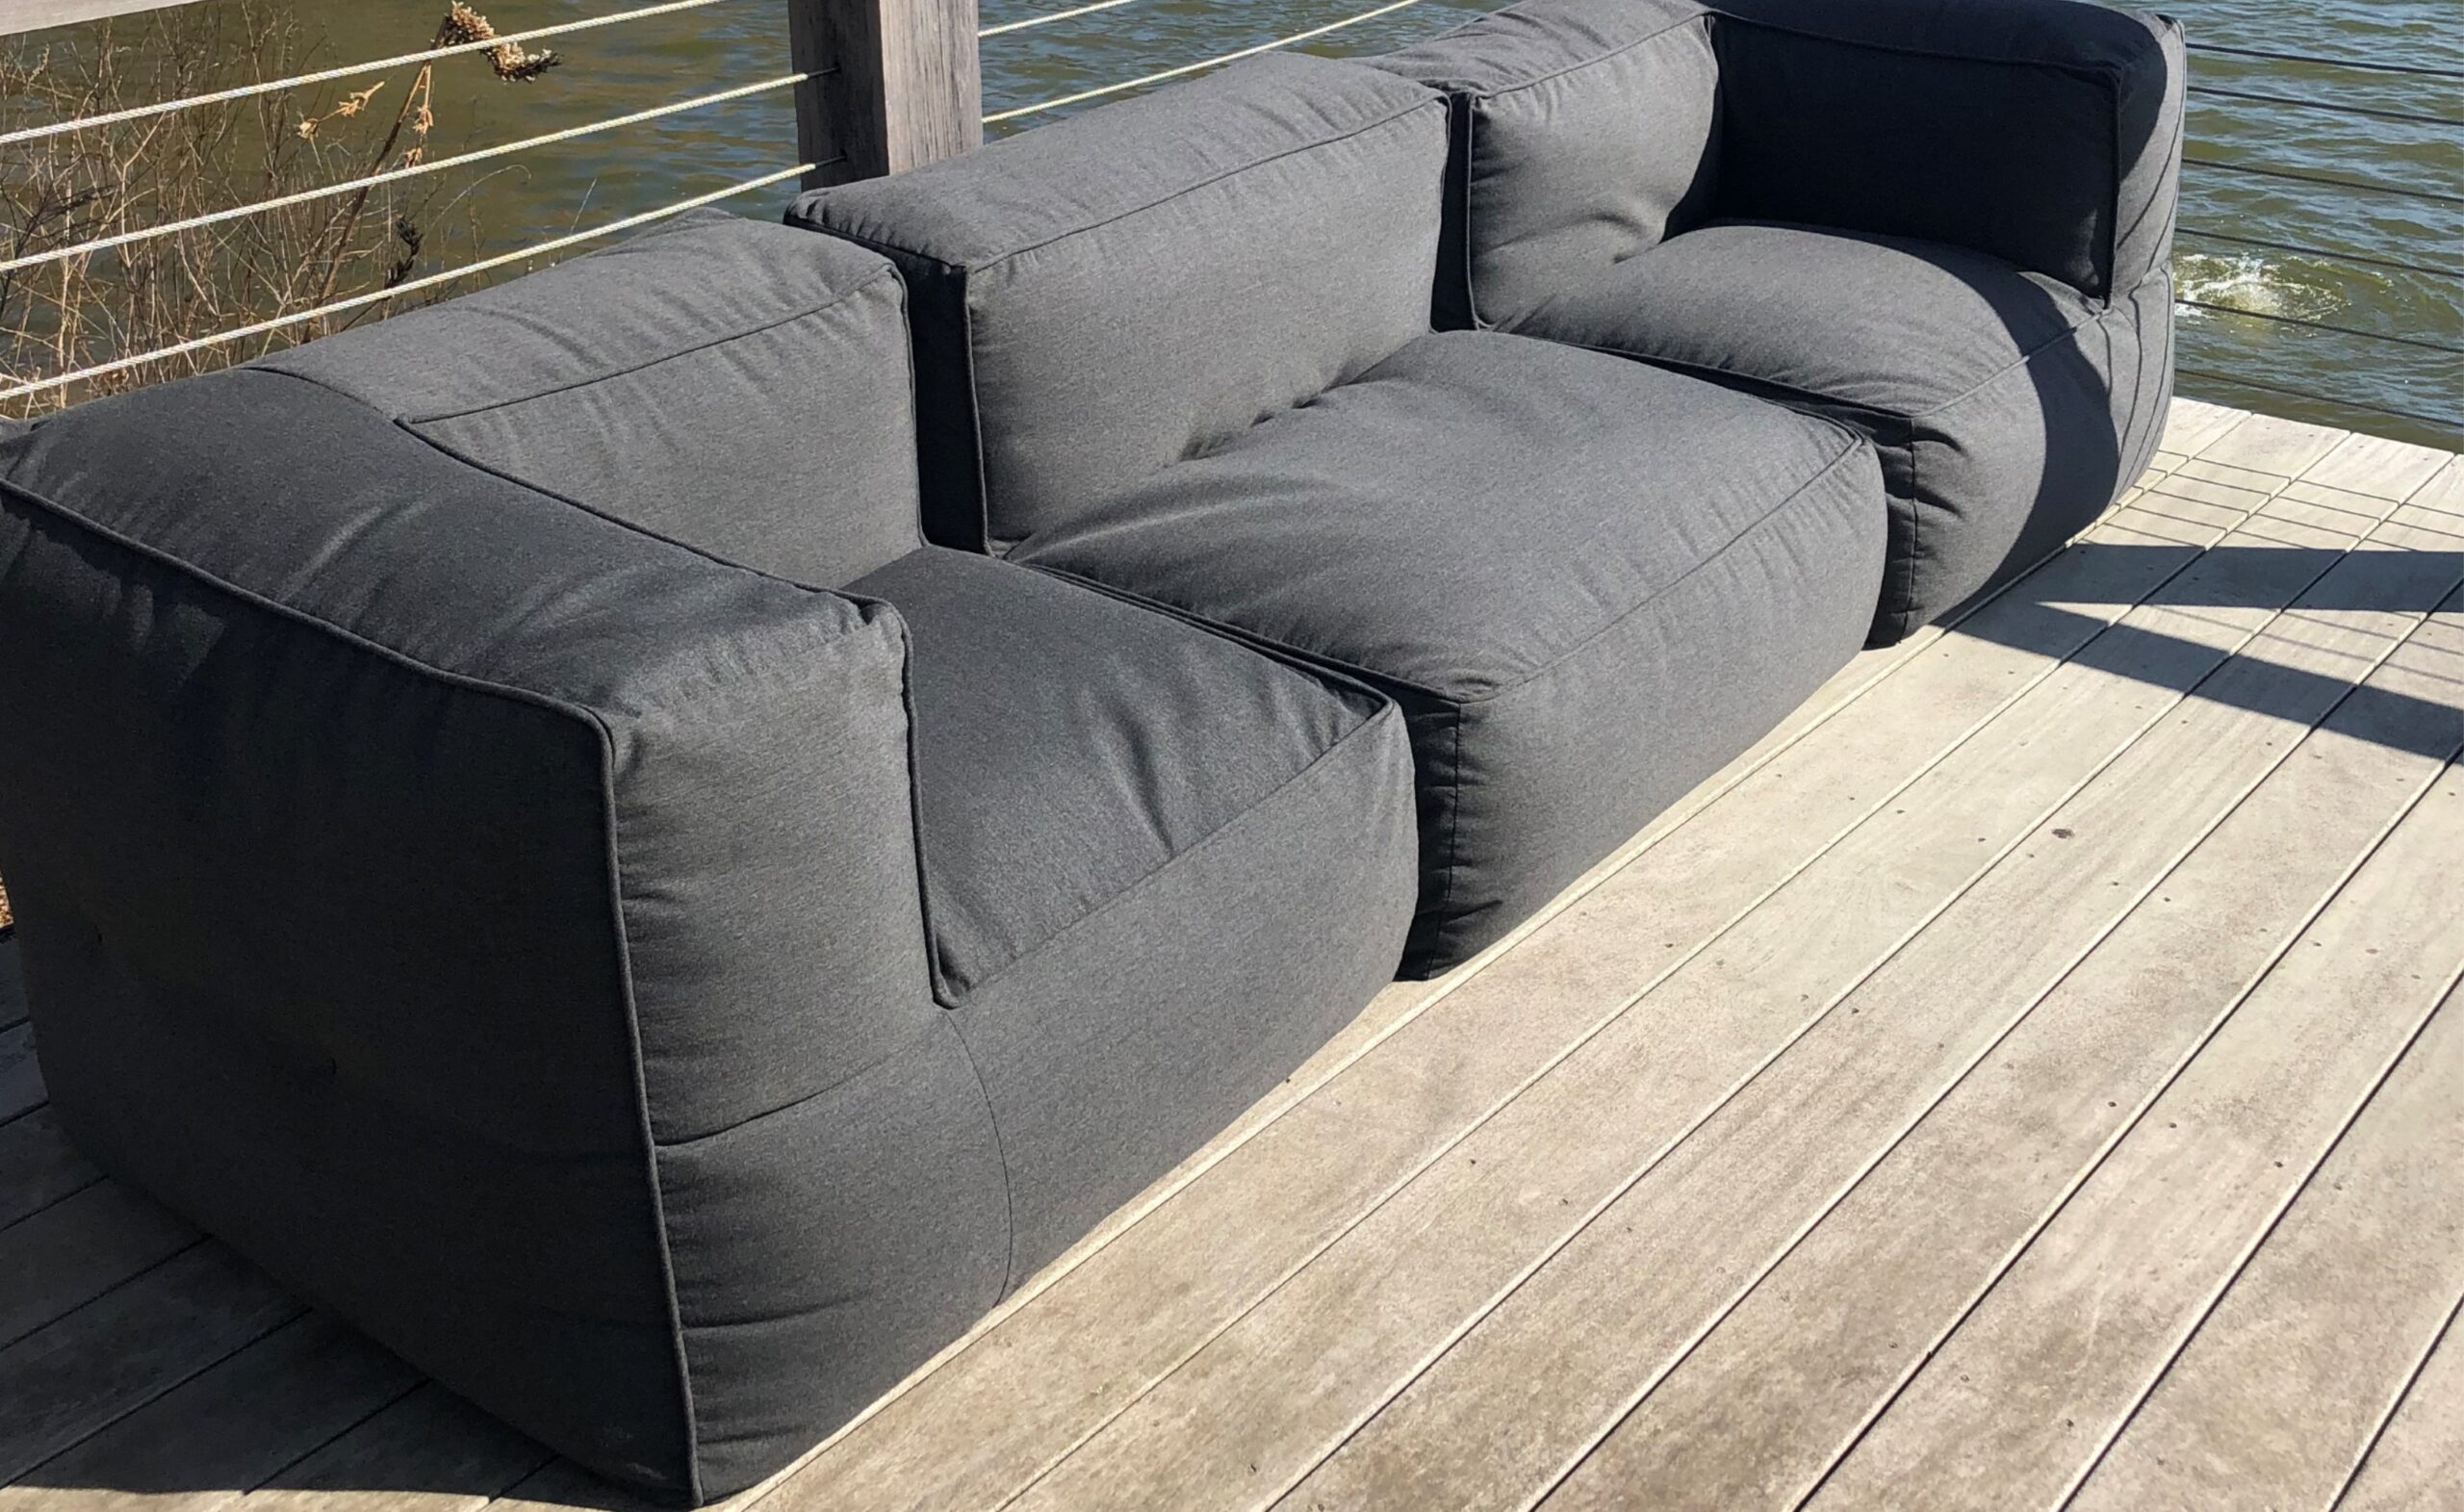 Beanbag Modular Sectional Sofa Lux Urban Trend Modern Beach Farm House Hamptons California Hotel Commercial Contract Furniture View Scaled 